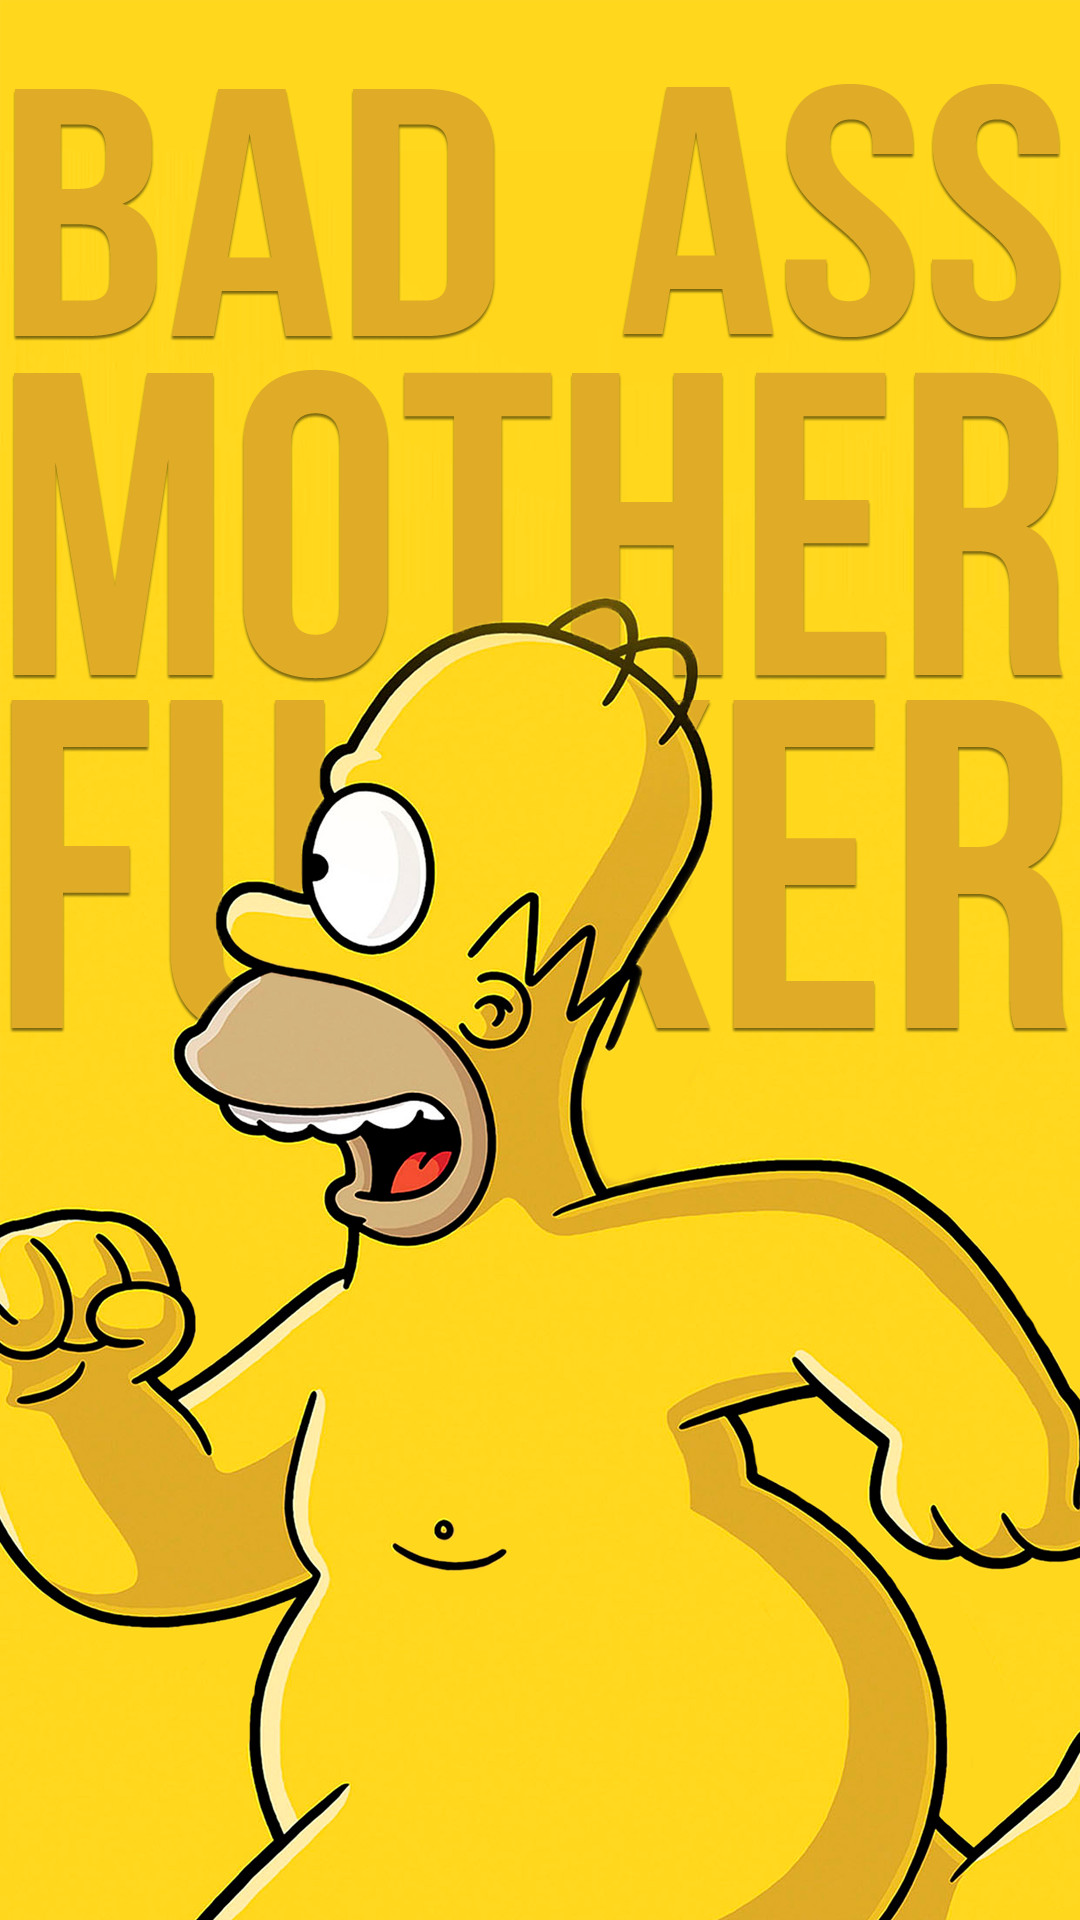 1080x1920 ANDROIDI heard a request for more phone wallpapers, so here's one for ya.  Homer Simpson in all his glory. [1080 x 1920] (Requests for background text  being ...